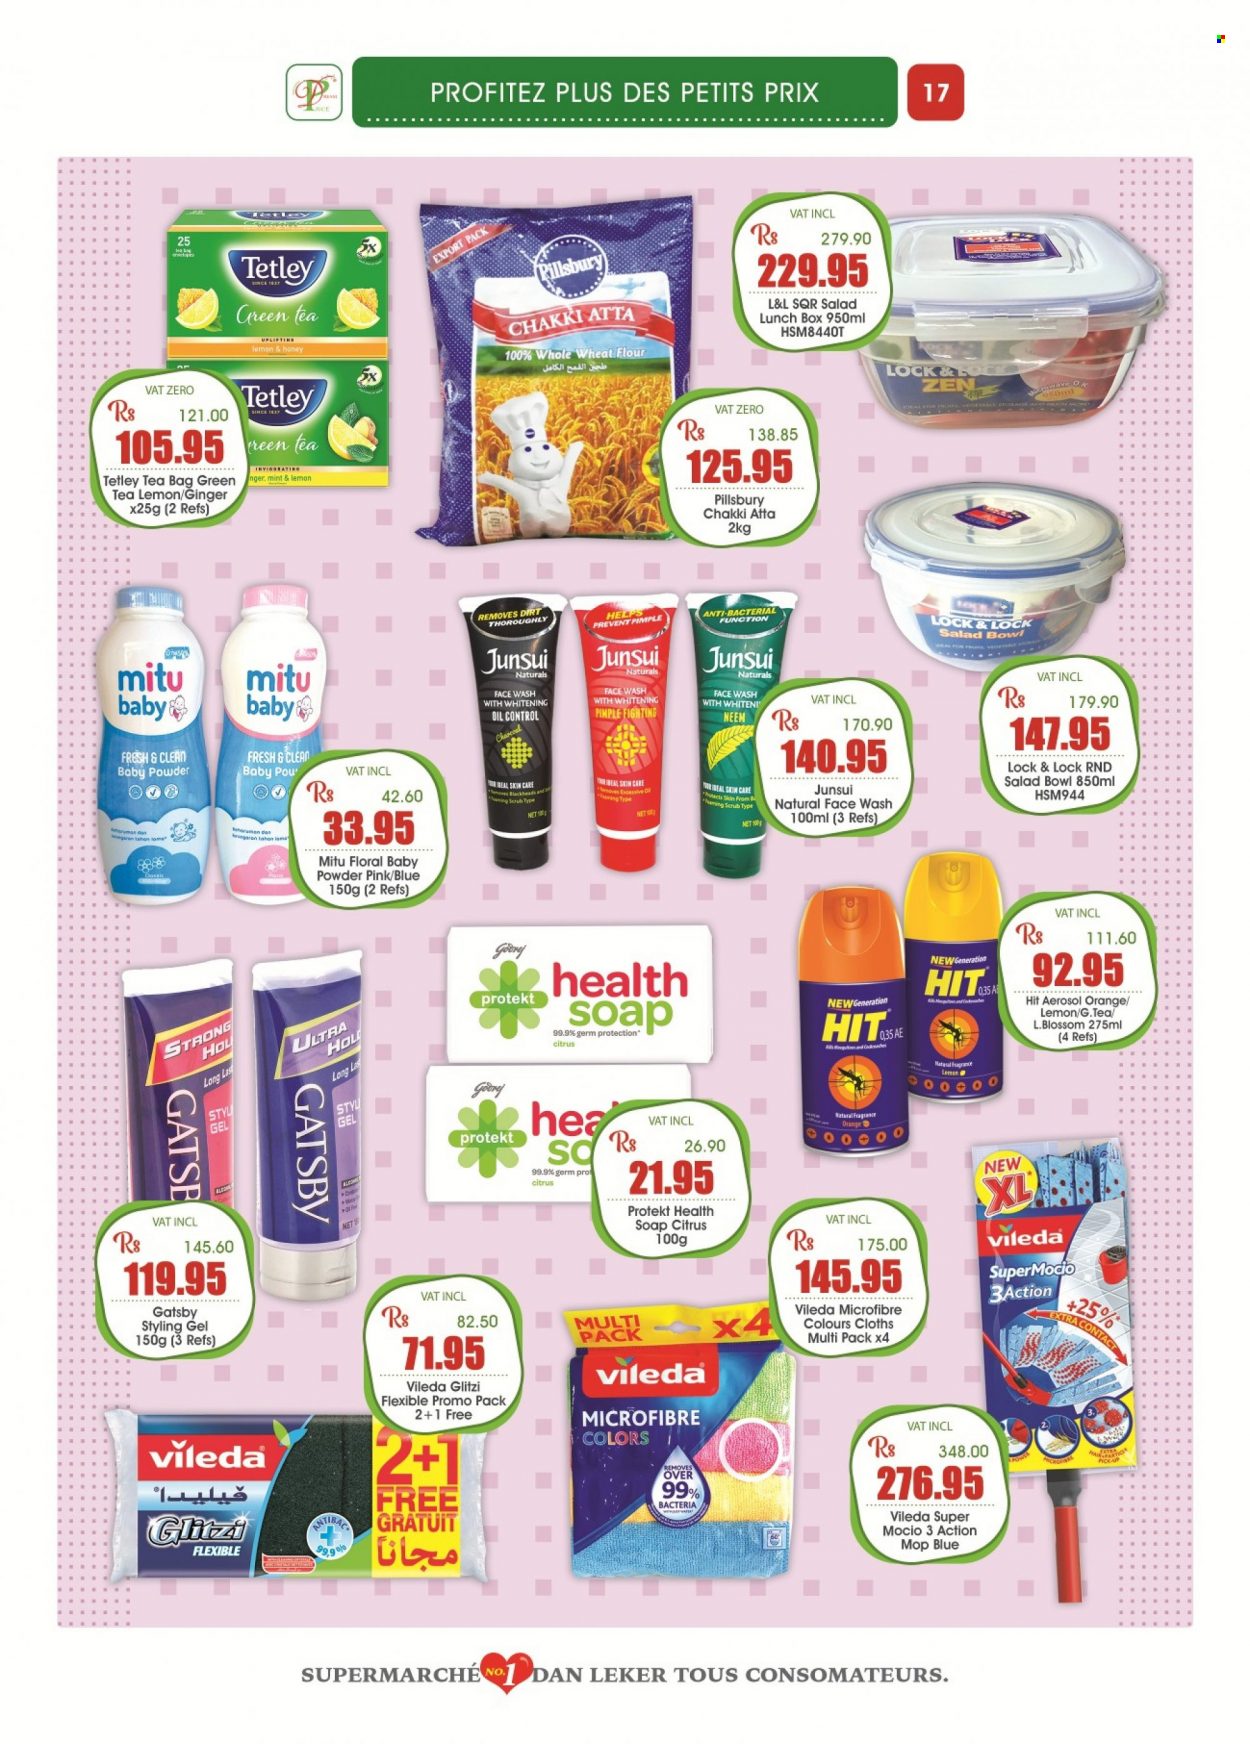 thumbnail - Dreamprice Catalogue - 19.08.2022 - 12.09.2022 - Sales products - ginger, oranges, Pillsbury, Blossom, flour, wheat flour, whole wheat flour, rice, oil, honey, green tea, tea bags, baby powder, face gel, soap, face wash, styling gel, fragrance, Vileda, mop, salad bowl, bowl, meal box. Page 17.